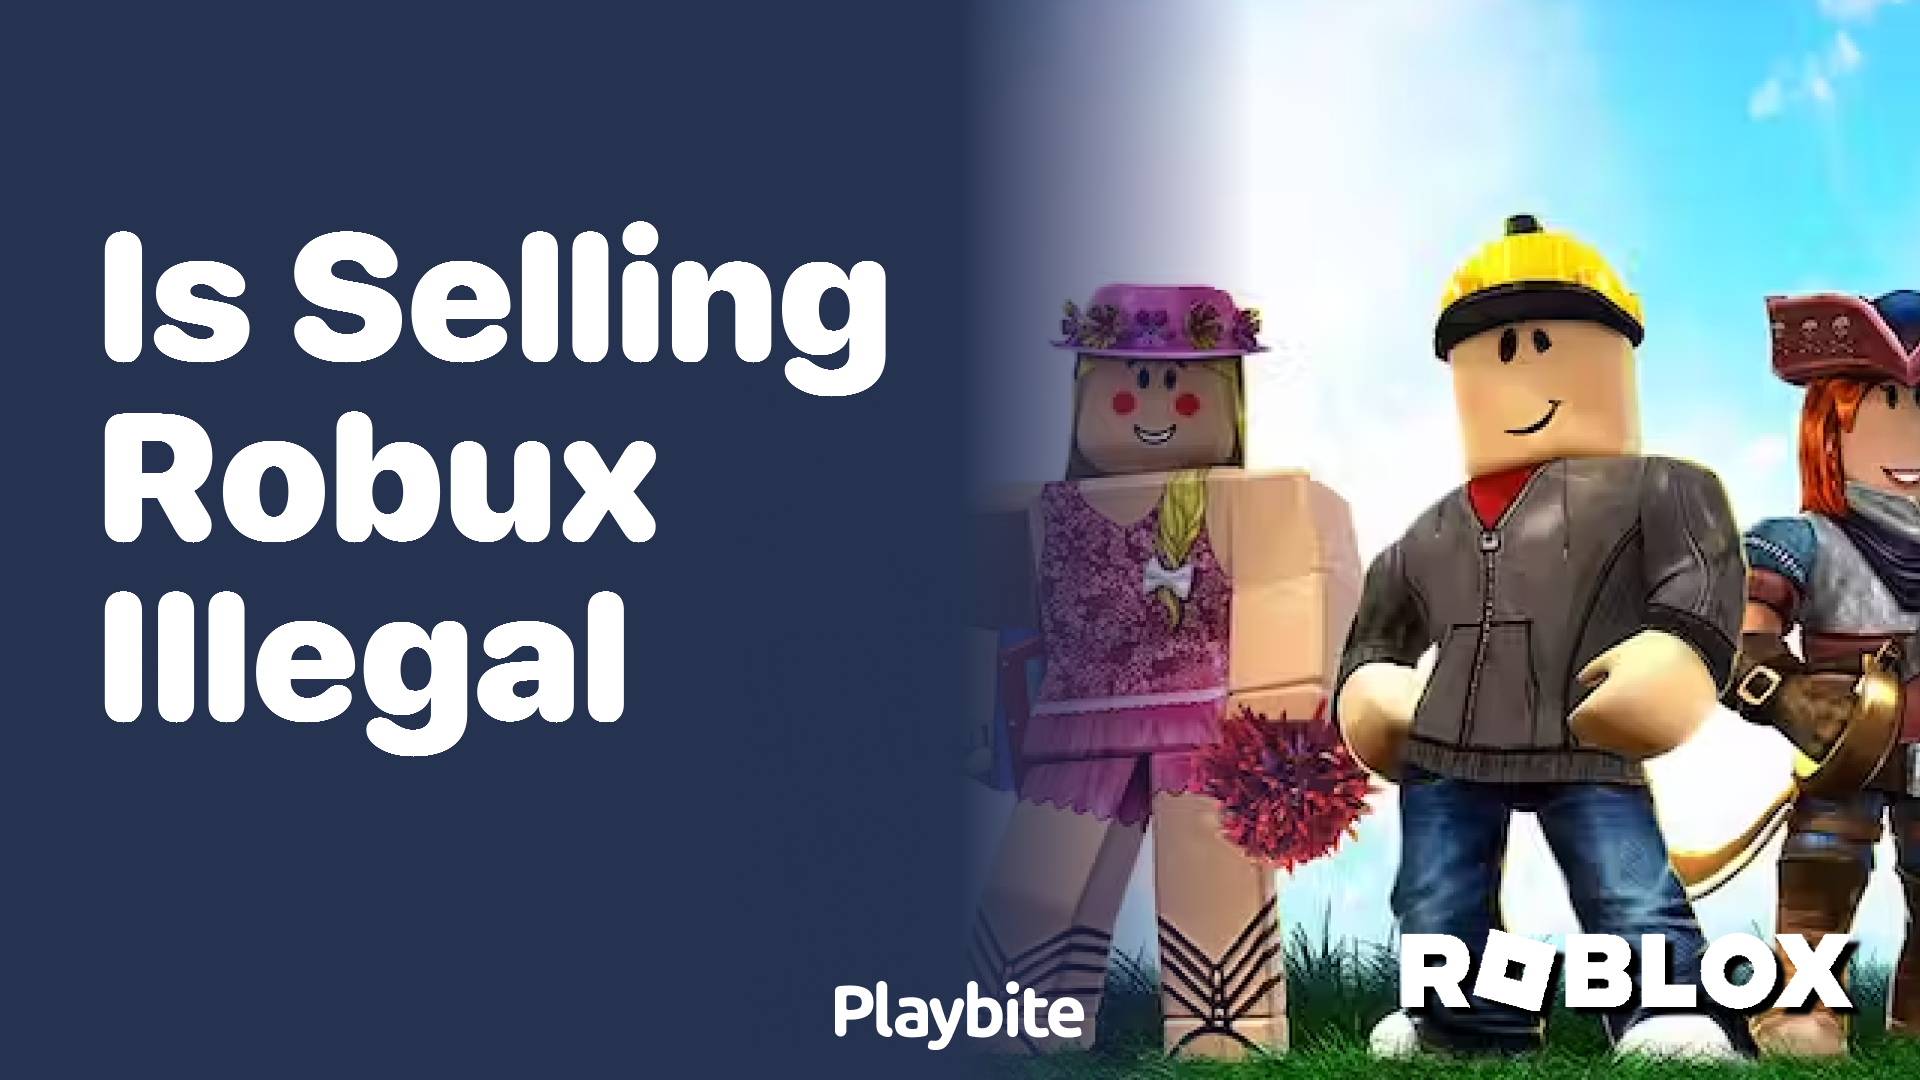 Is Selling Robux Illegal? Find Out the Important Details!